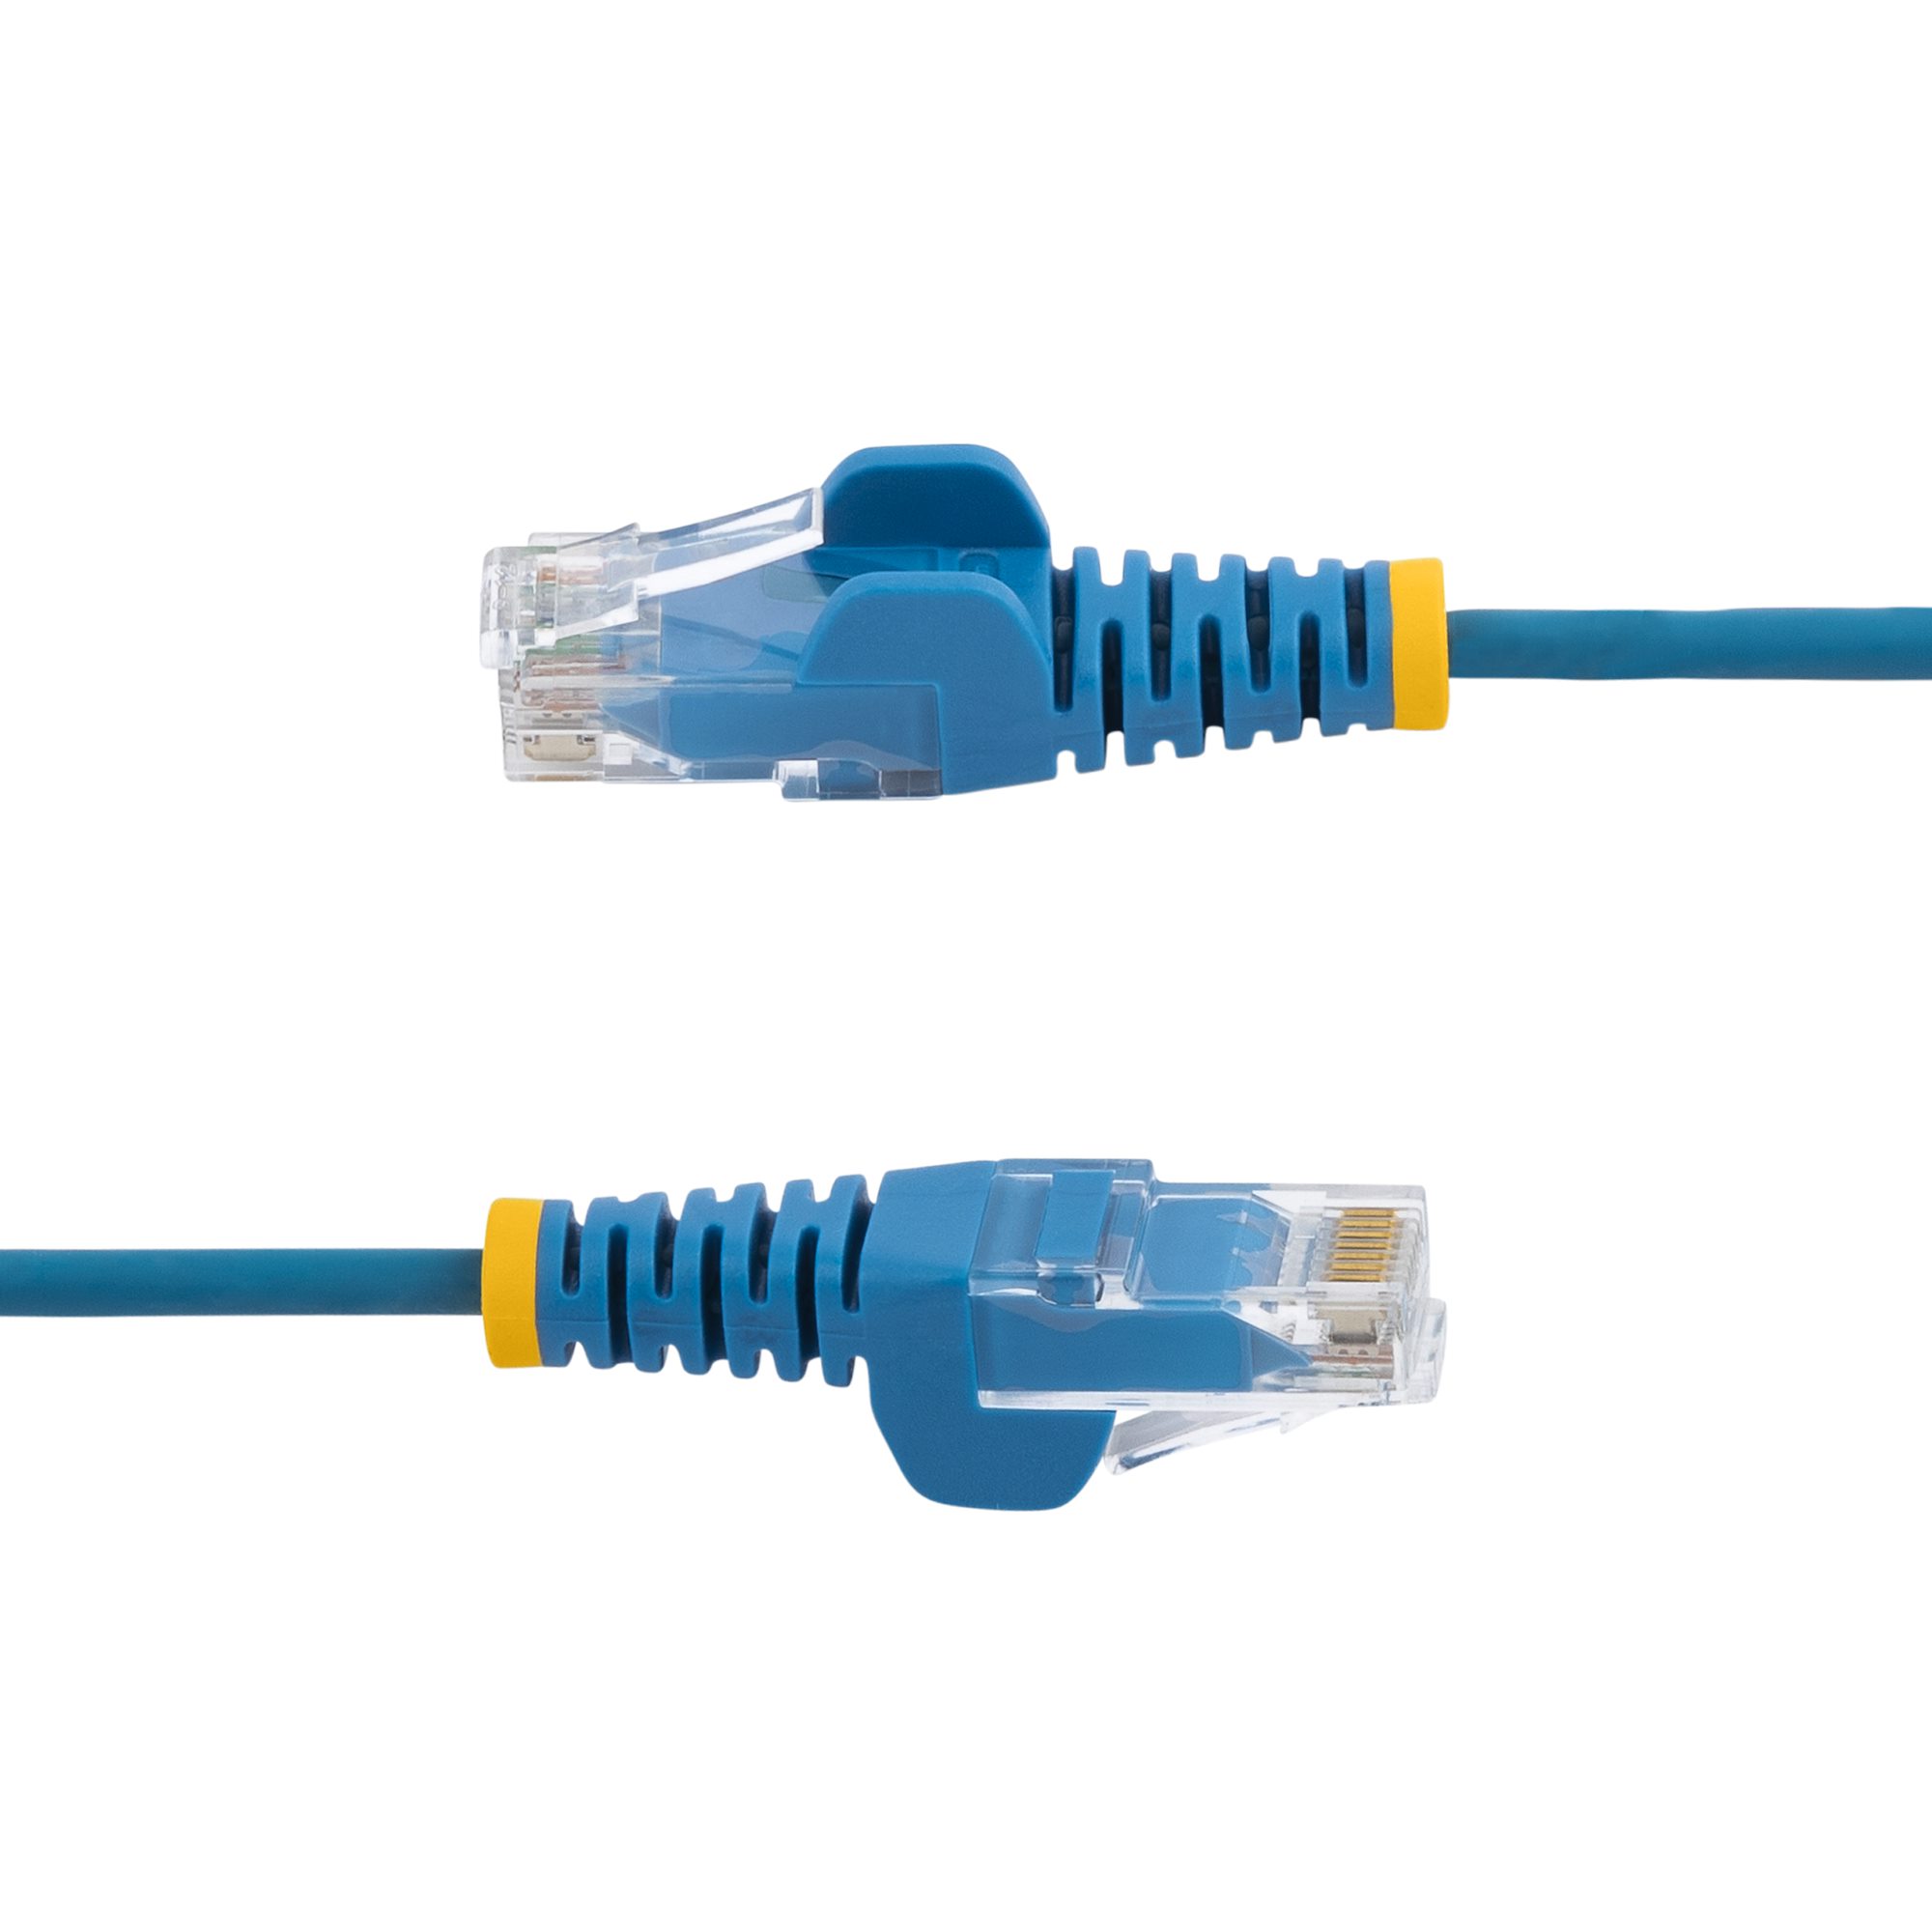 CABLE PATCH ETHERNET CAT6, 10FTCB4310GY